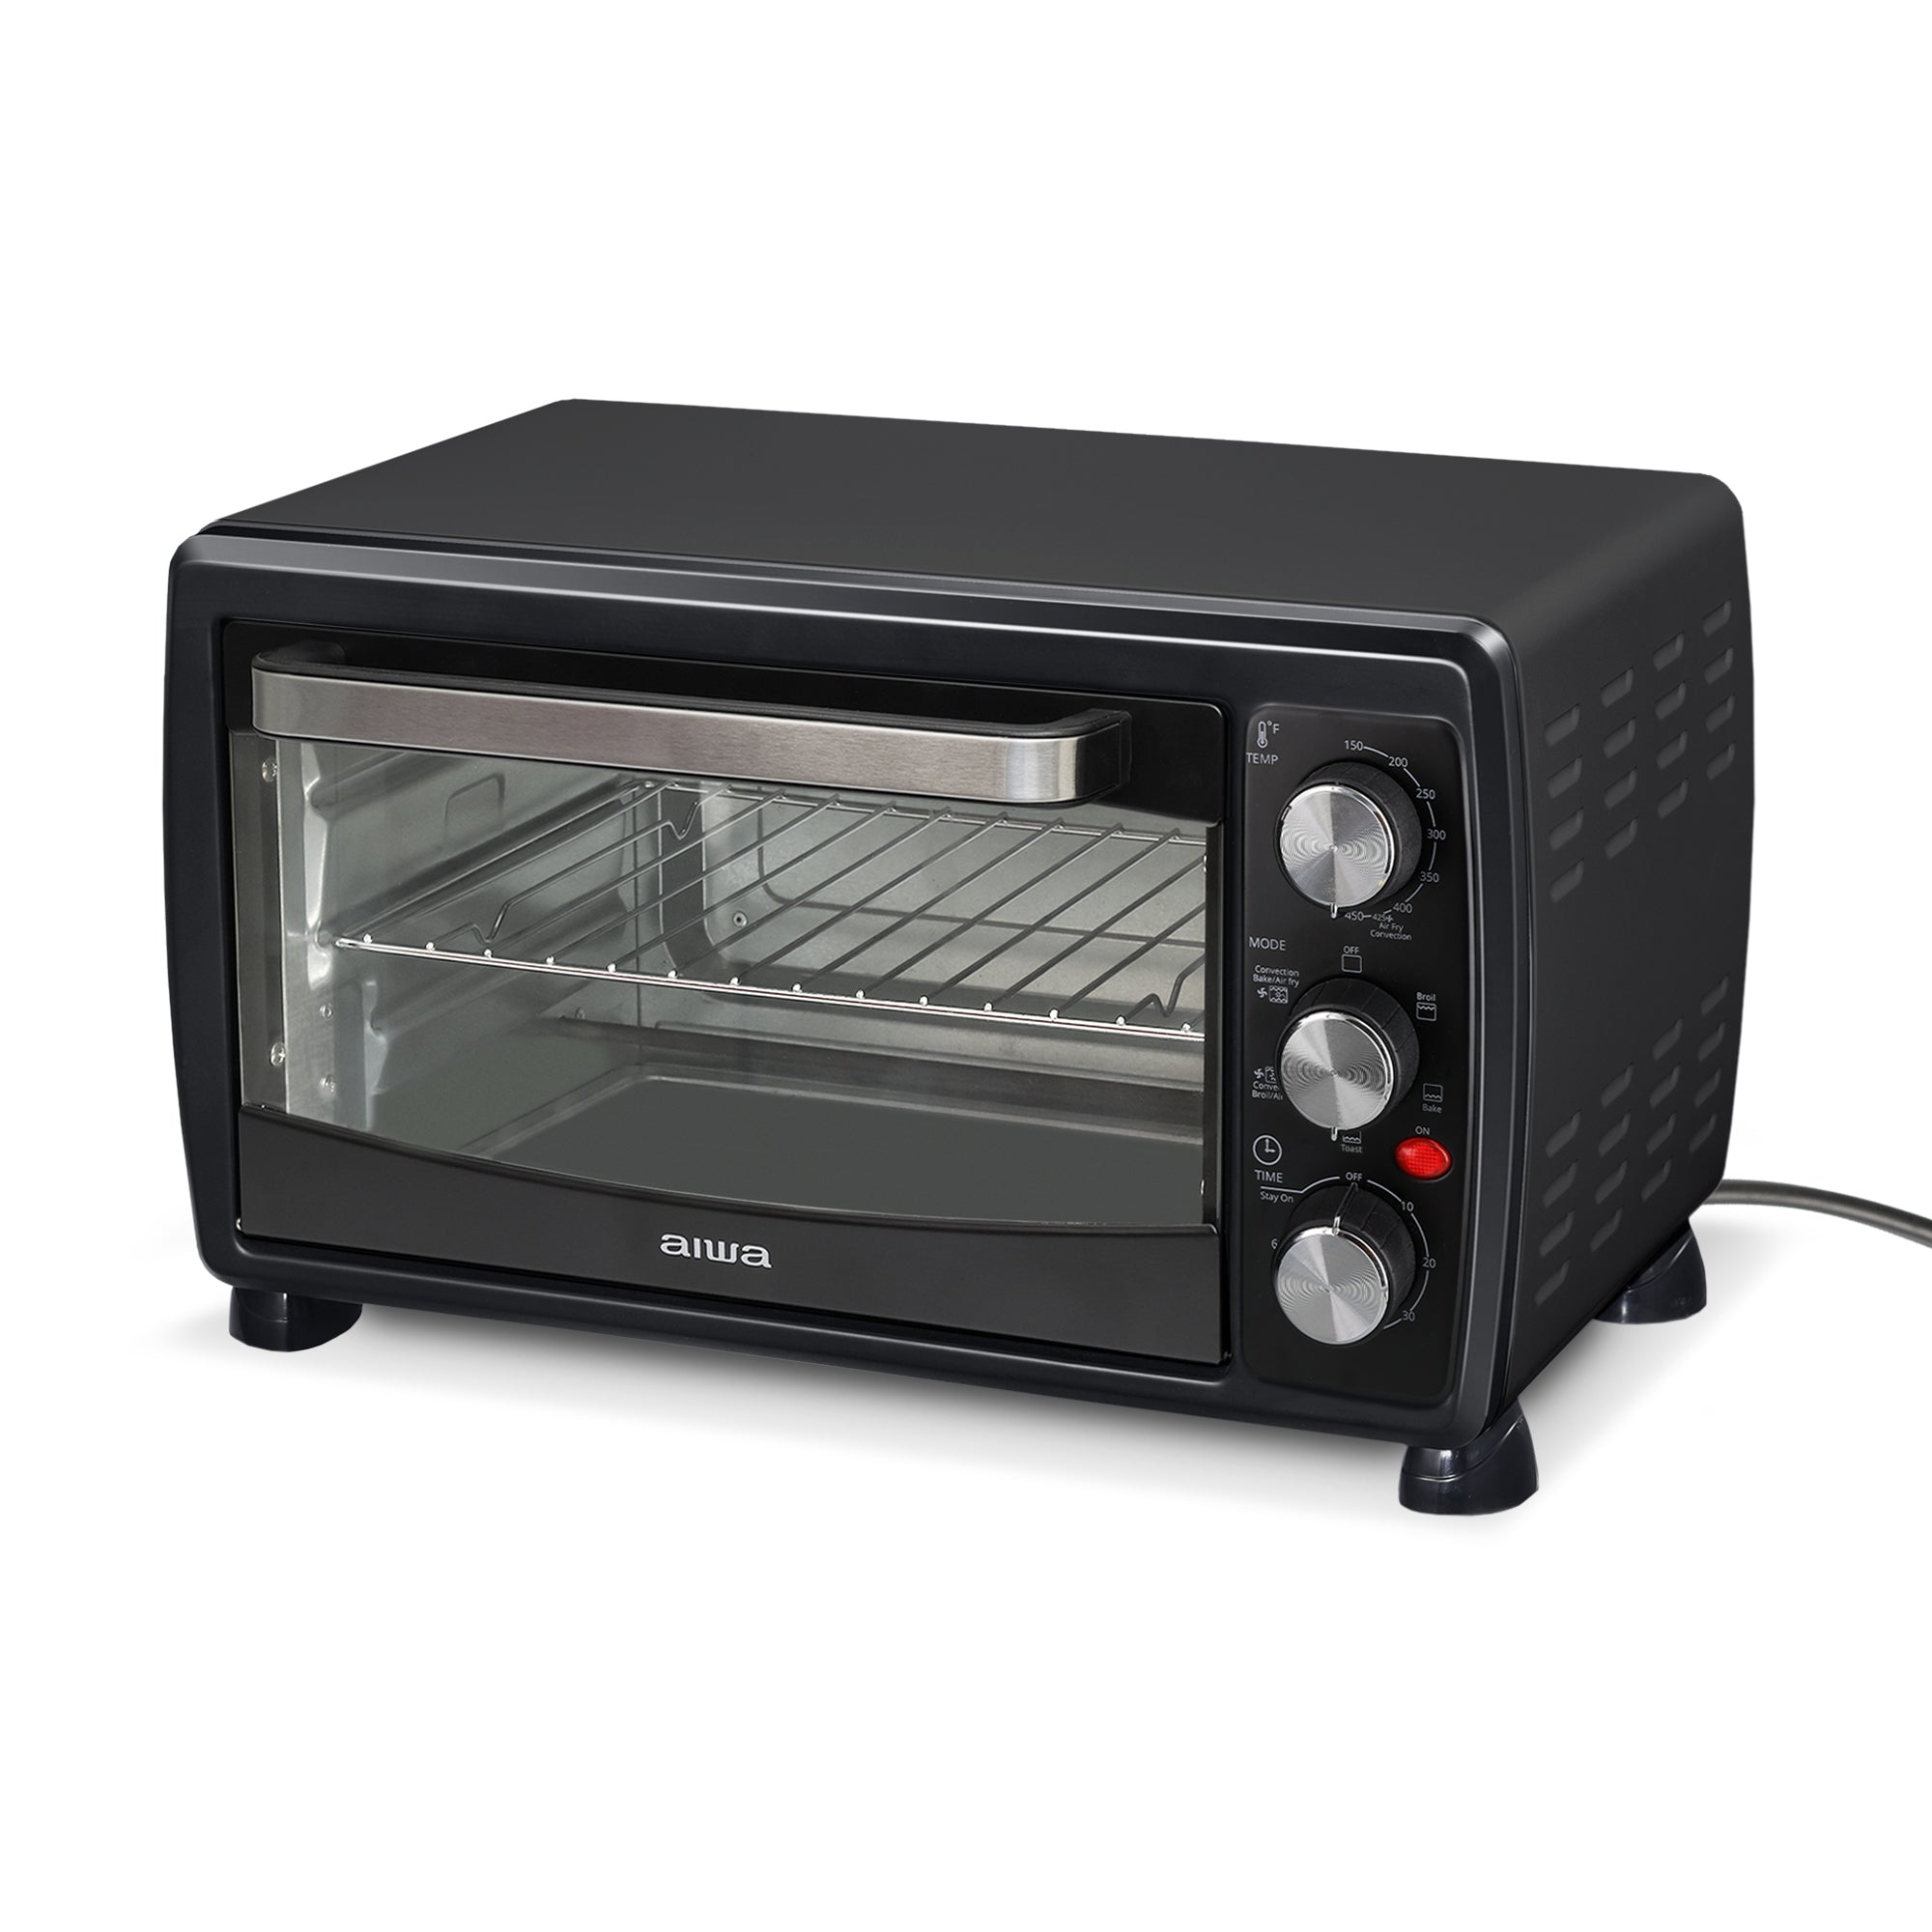 How to Air Fry With a Convection Toaster Oven